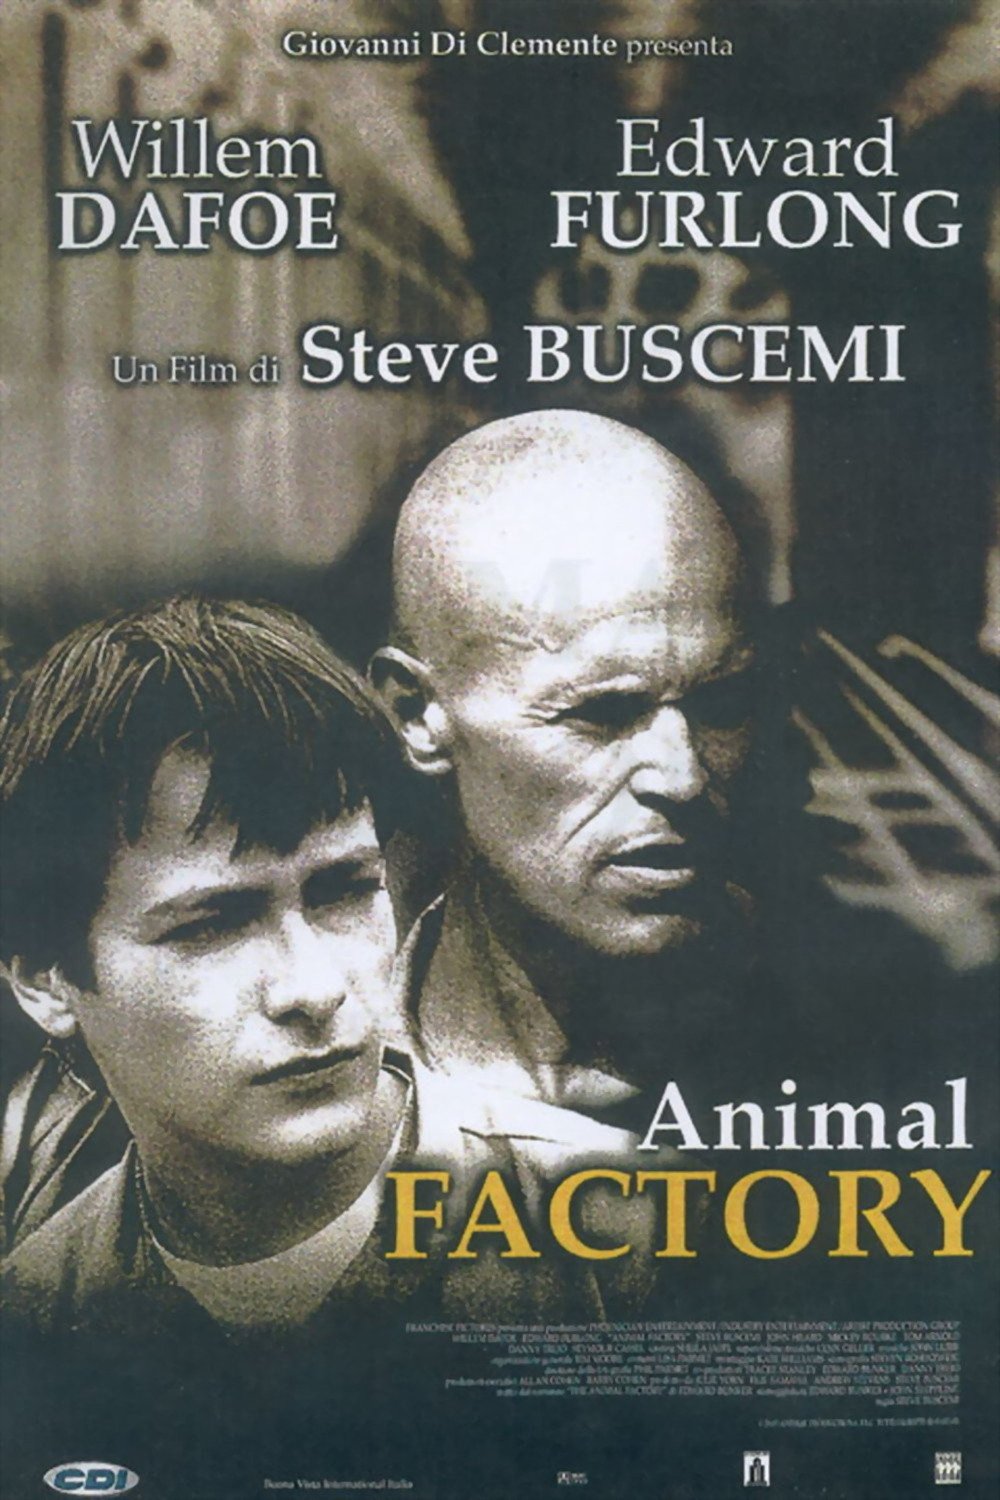 Poster of the movie Animal Factory